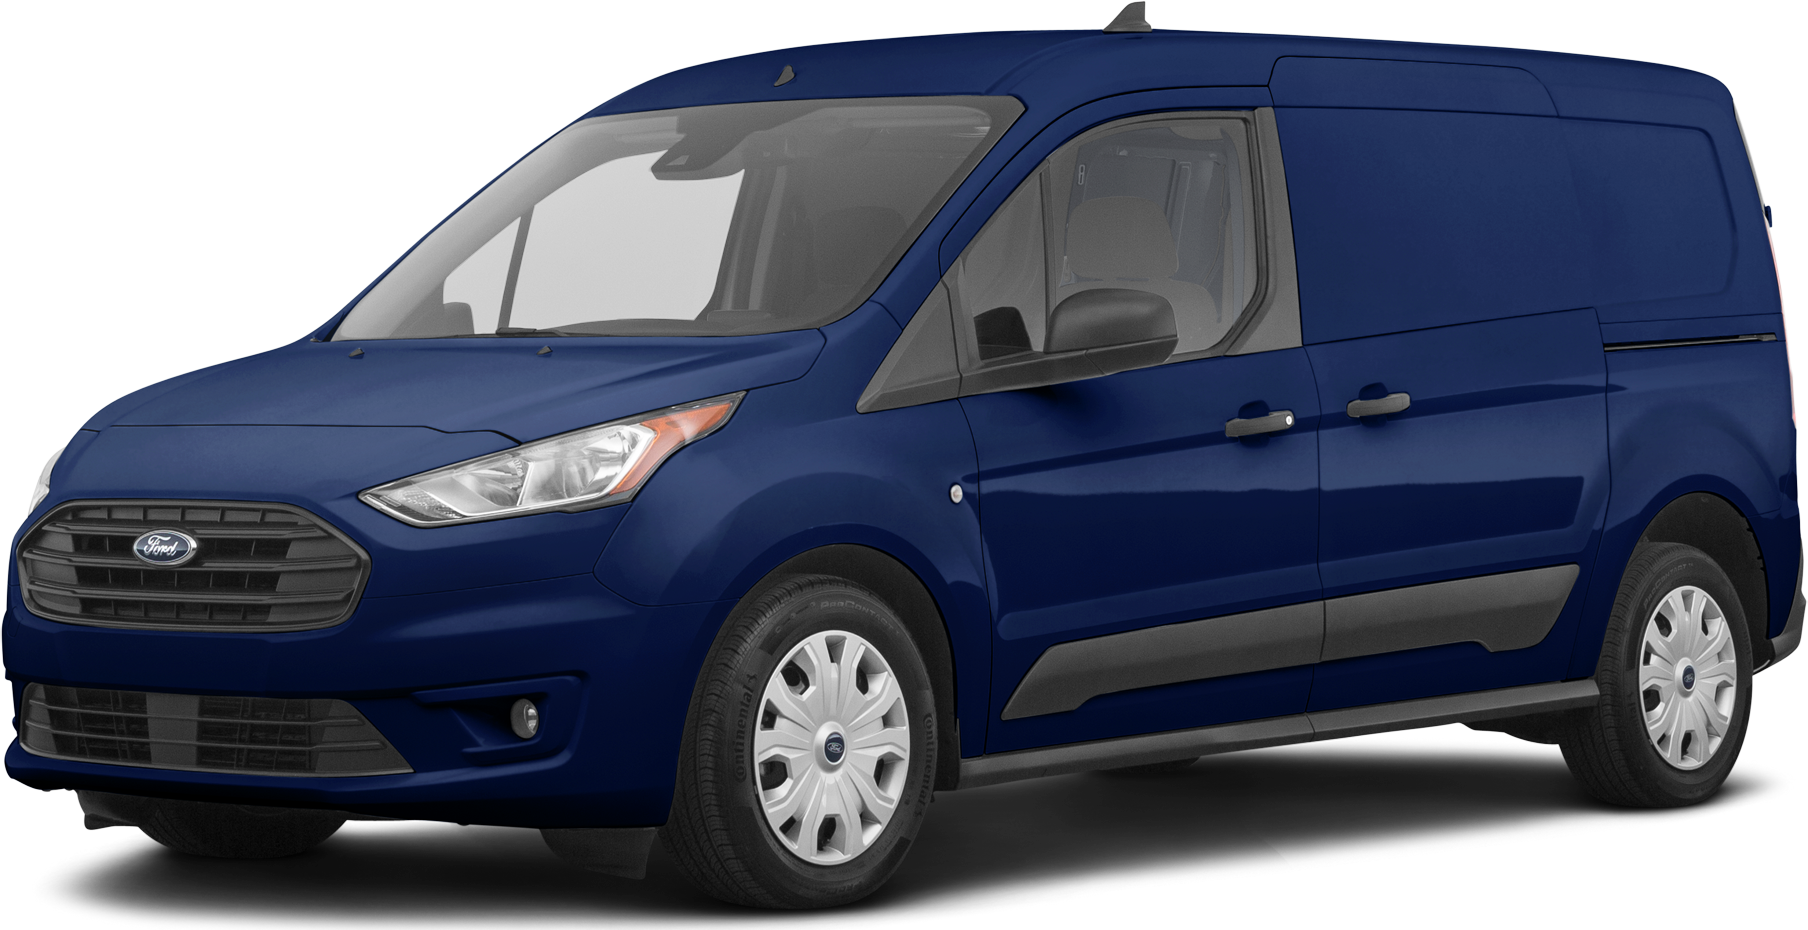 https://file.kelleybluebookimages.com/kbb/base/evox/CP/13634/2019-Ford-Transit%20Connect%20Cargo-front_13634_032_1808x930_UV_cropped.png